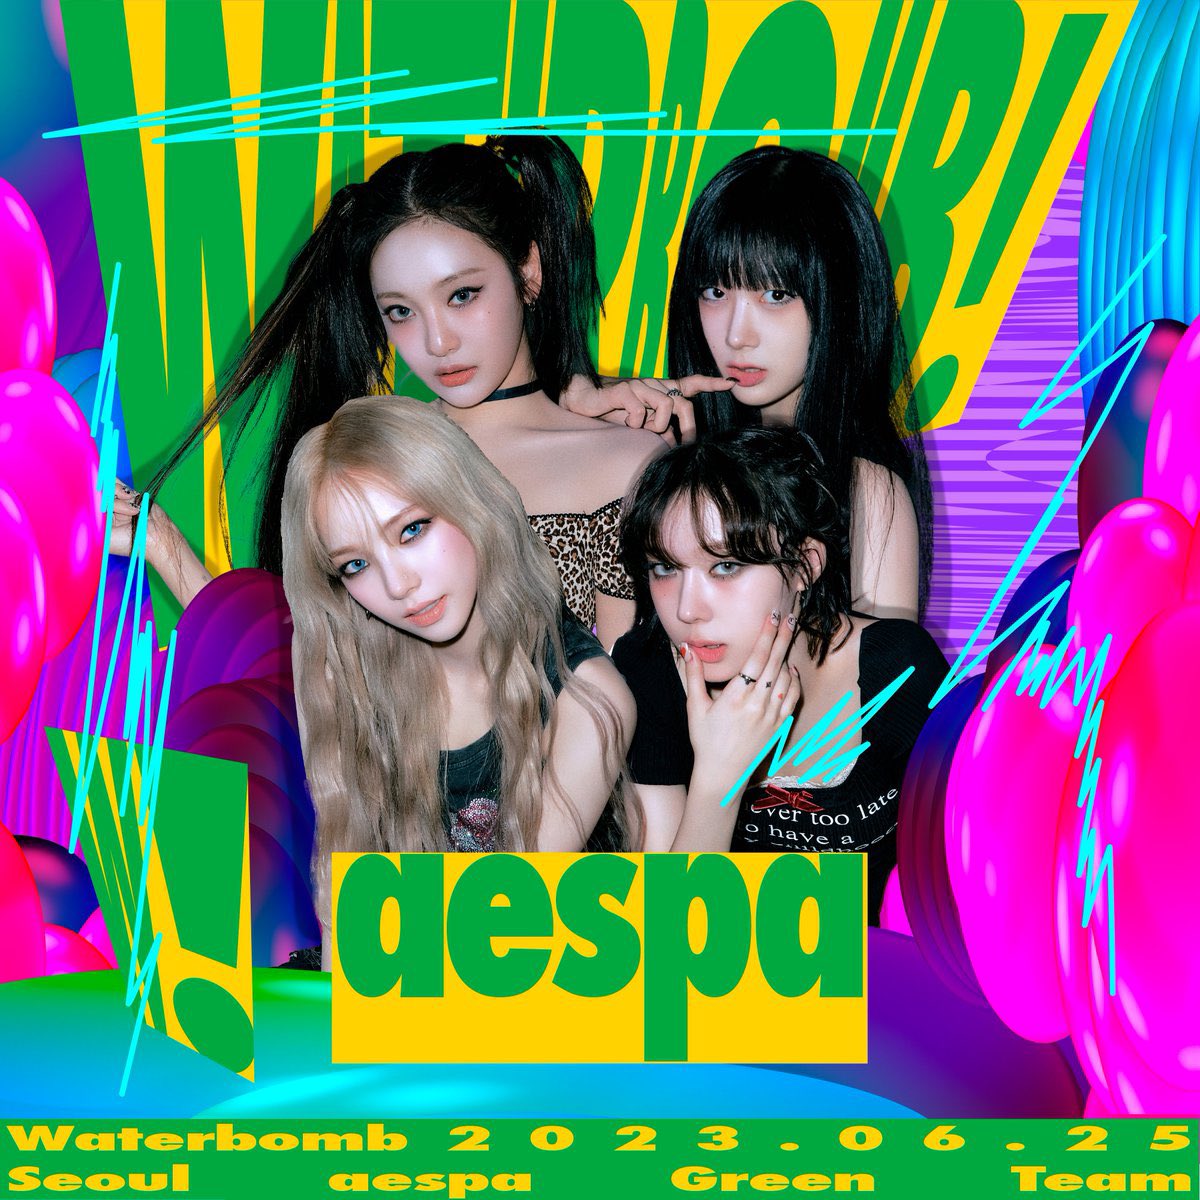 aespa WATERBOMB 2023 SEOUL Setlist

— Next Level
— Illusion
— Thirsty 
— YEPPI YEPPI
— Spicy 

AESPA WATERBOMB SEOUL
#aespaAtWaterbomb #WATERBOMB2023
#aespa #에스파 @aespa_official